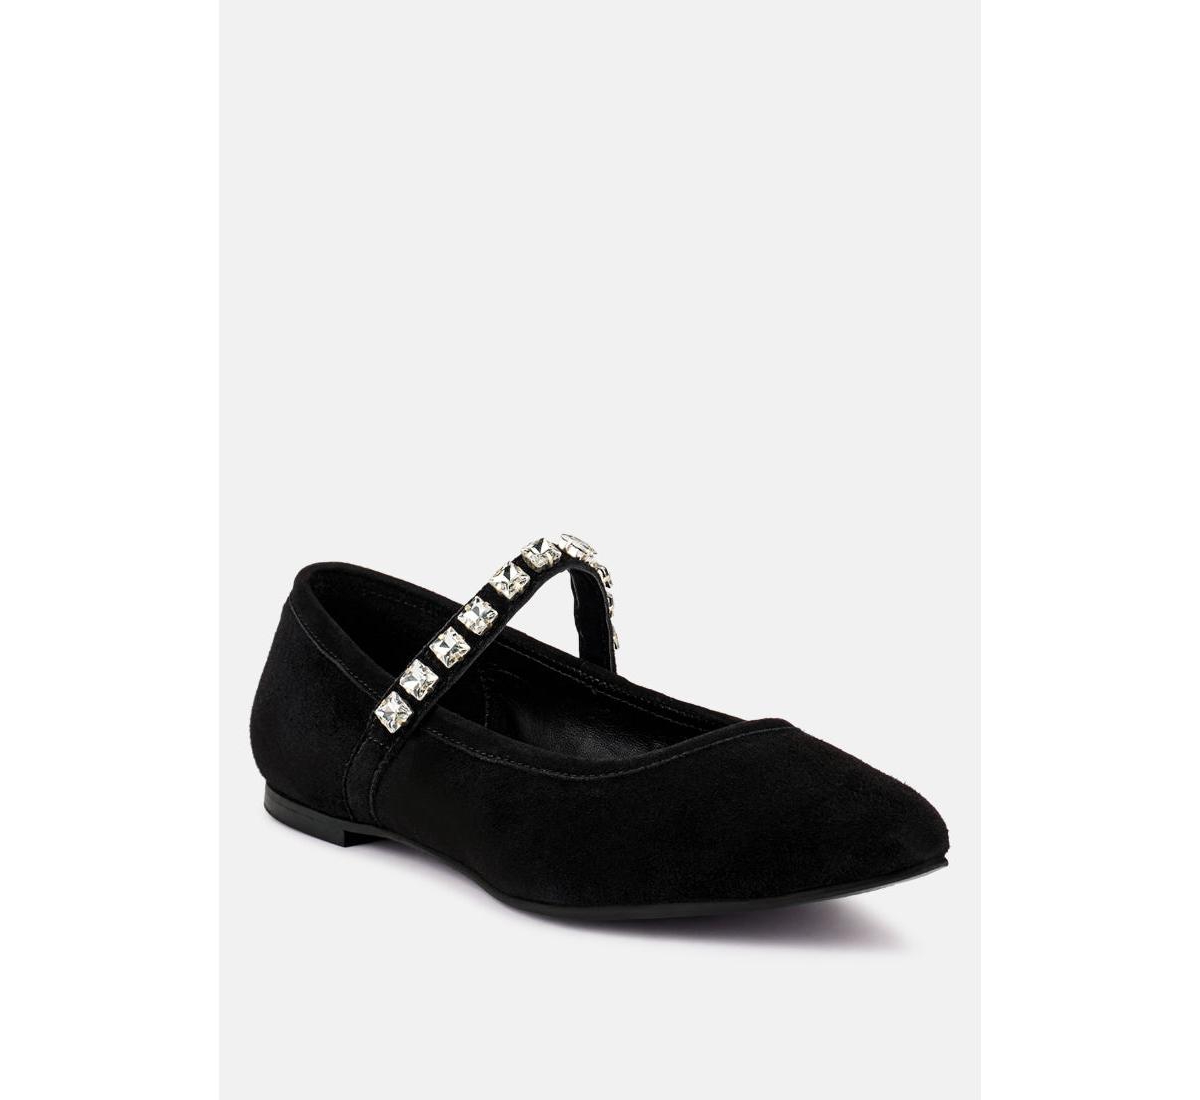 RAG & CO ASSISI WOMENS FINE SUEDE MARY JANE BALLET FLATS